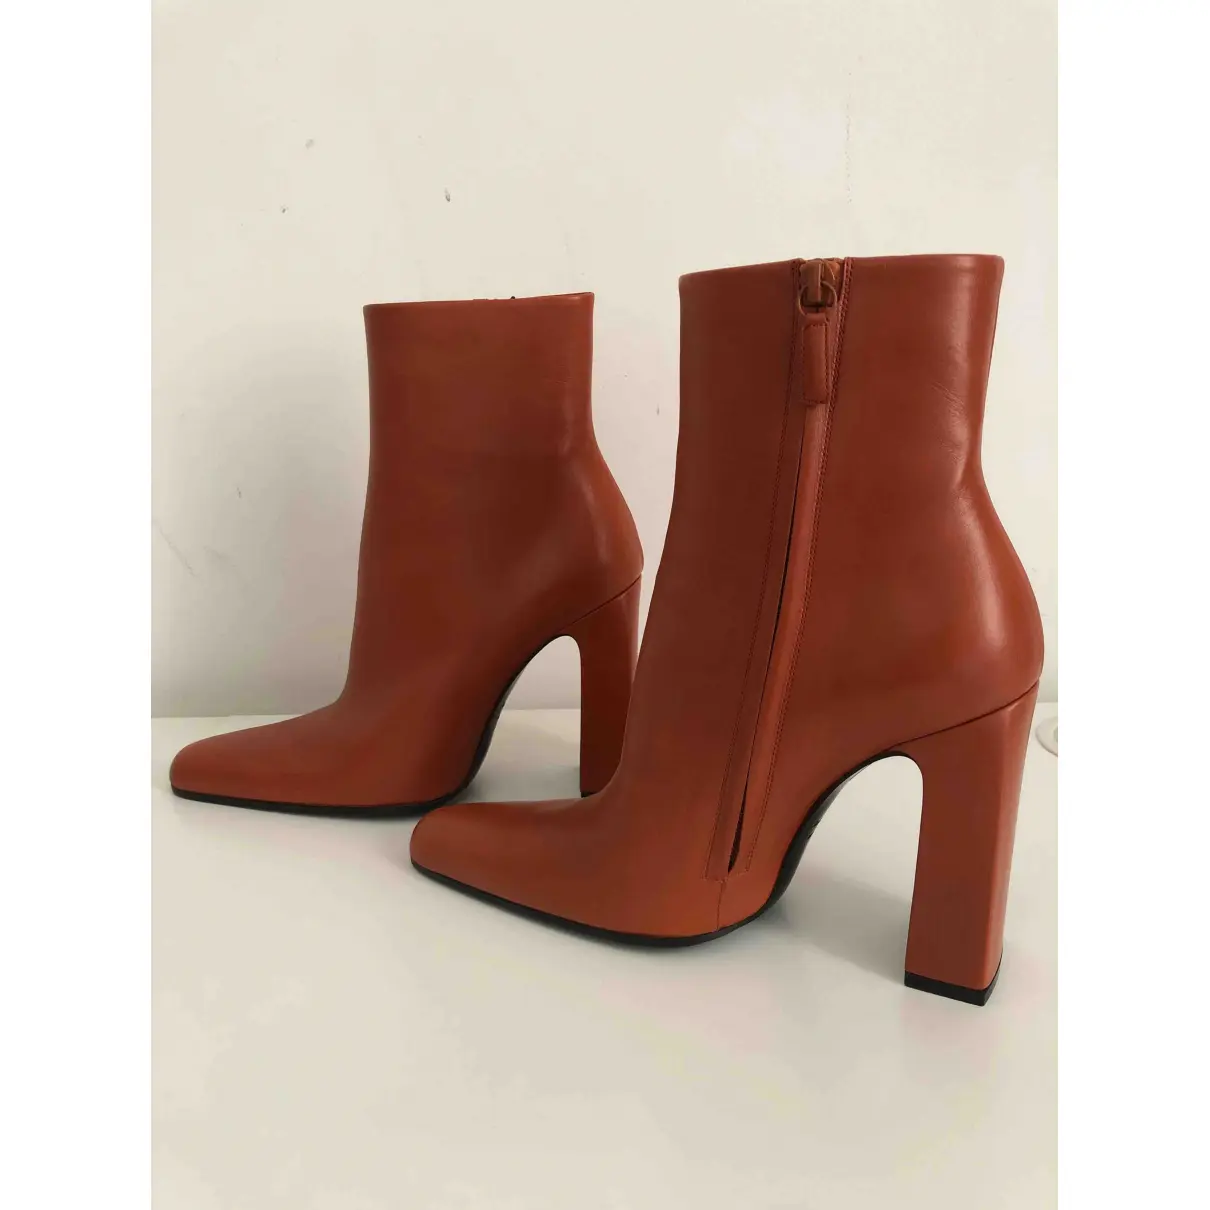 Round leather ankle boots Balenciaga